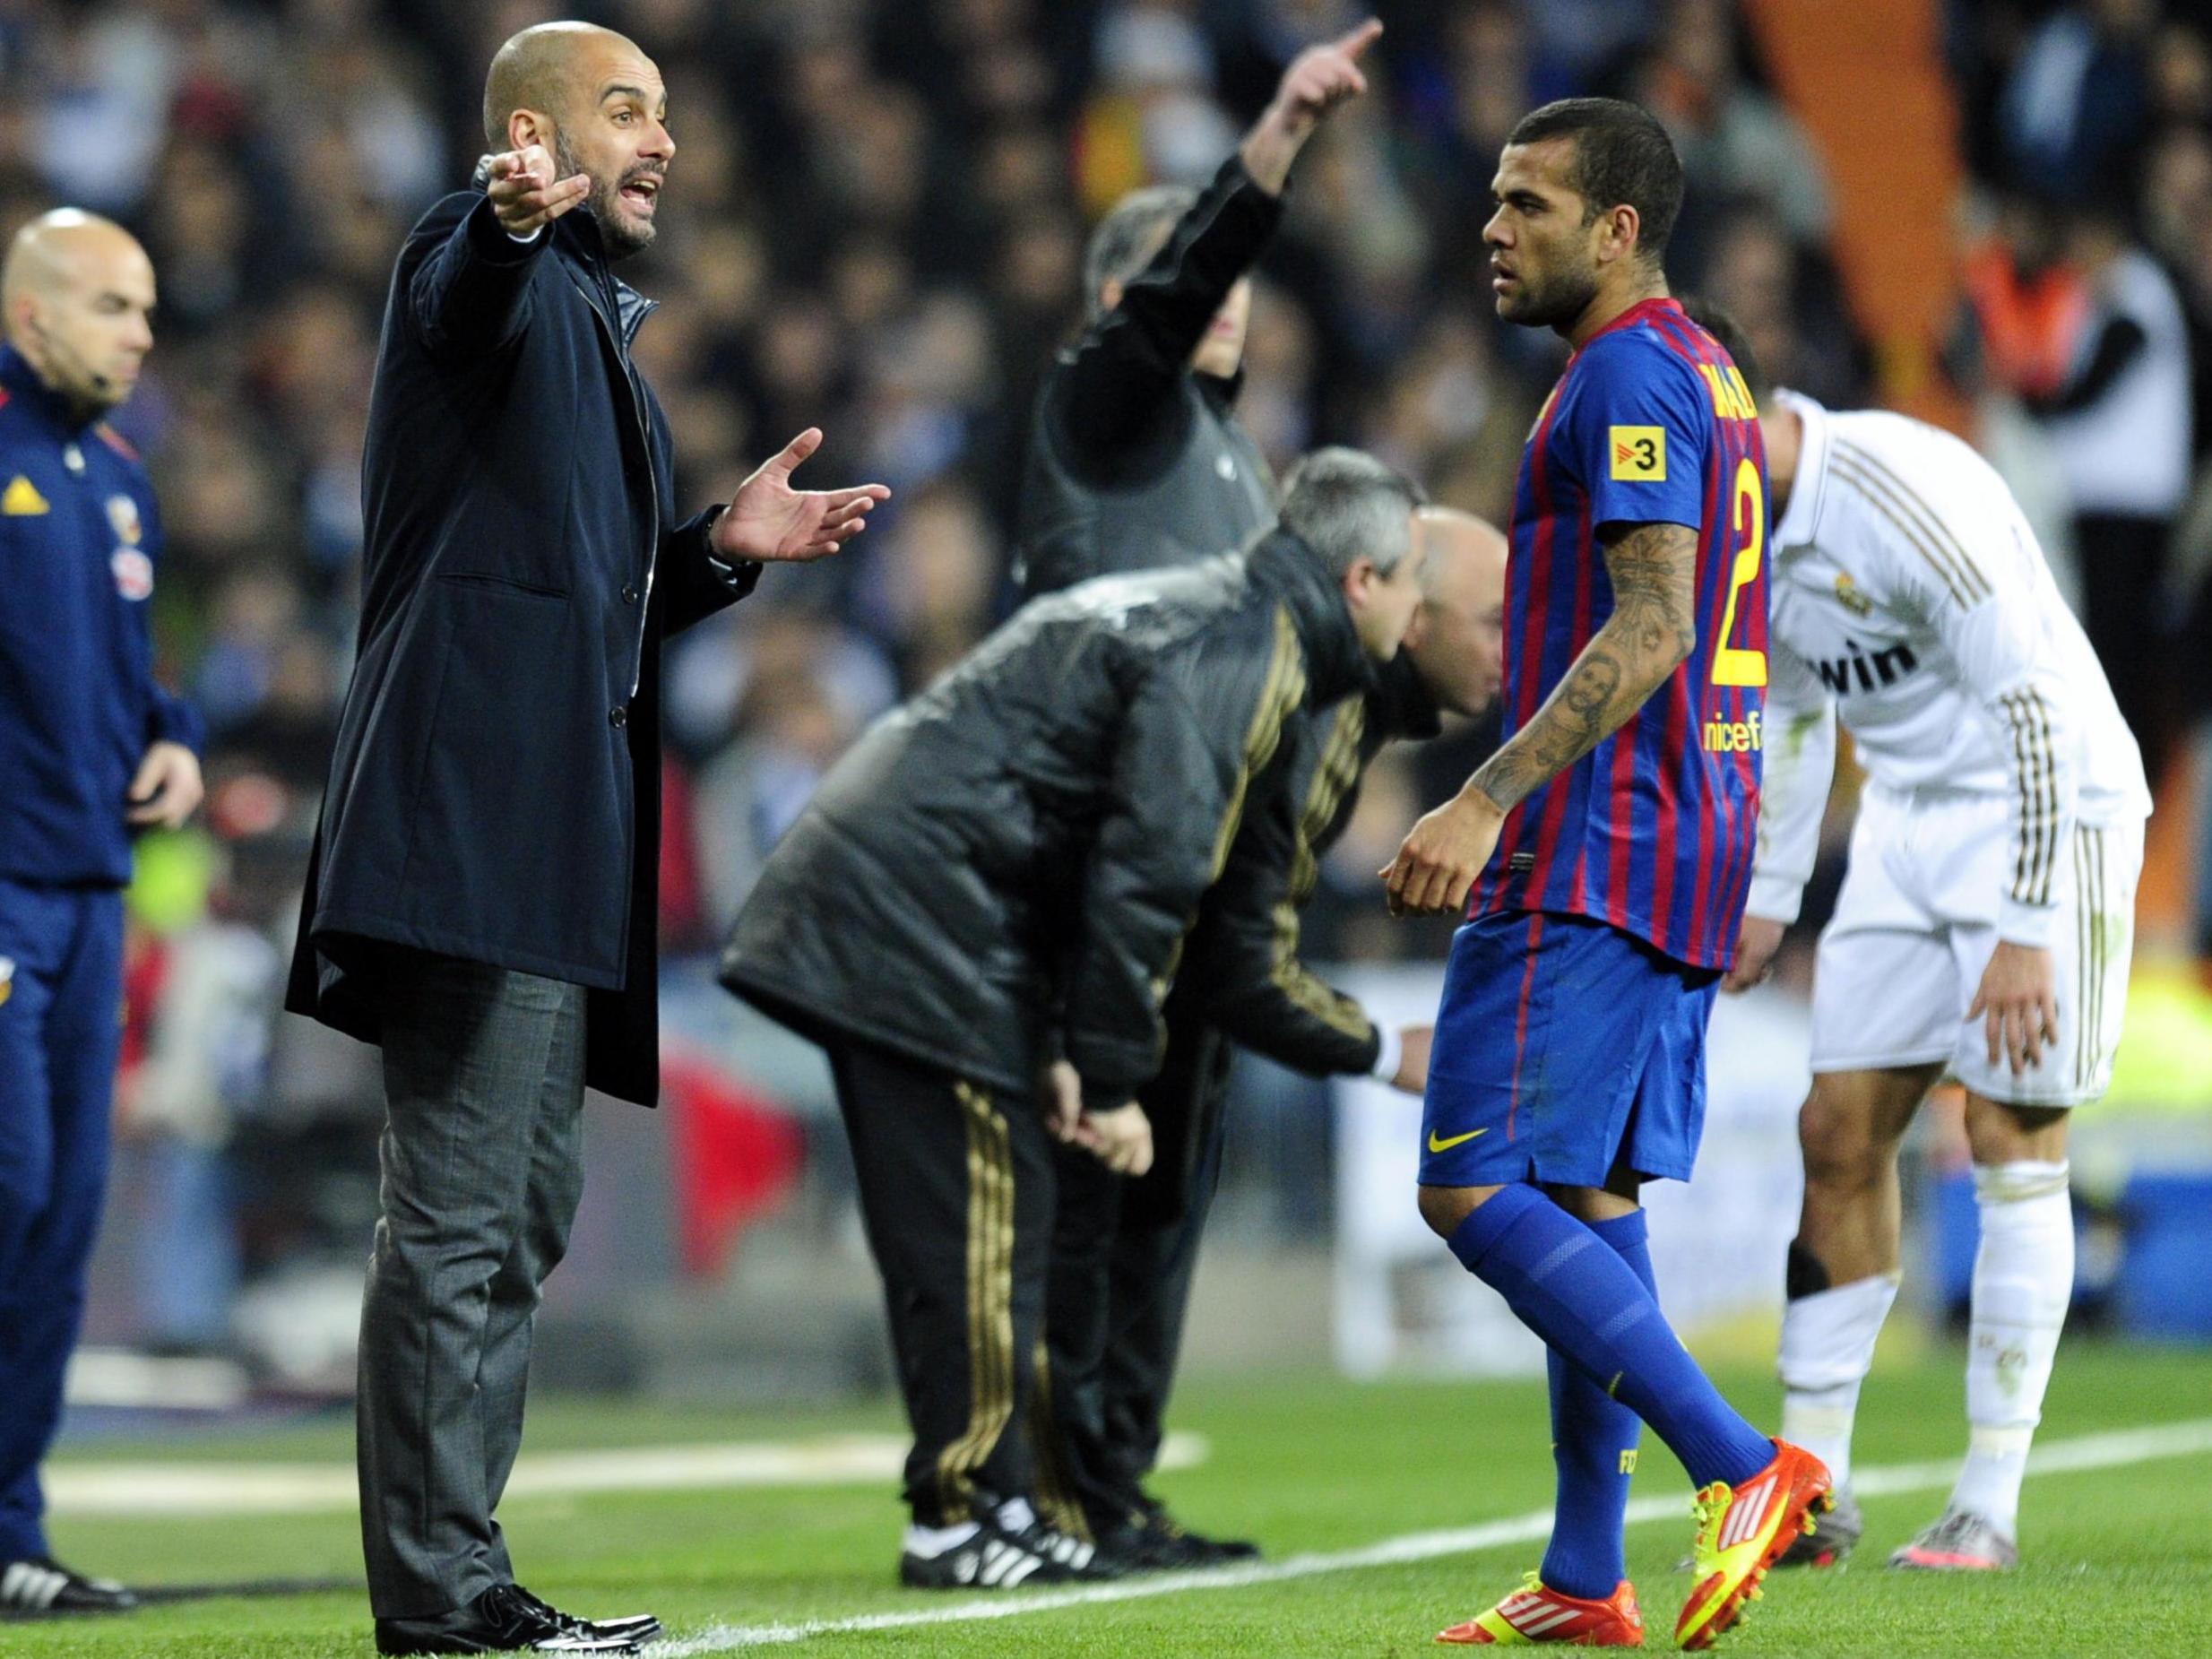 Pep Guardiola&apos;s &apos;magical touch&apos; inspired Barcelona, Bayern Munich and Manchester City, claims Dani Alves